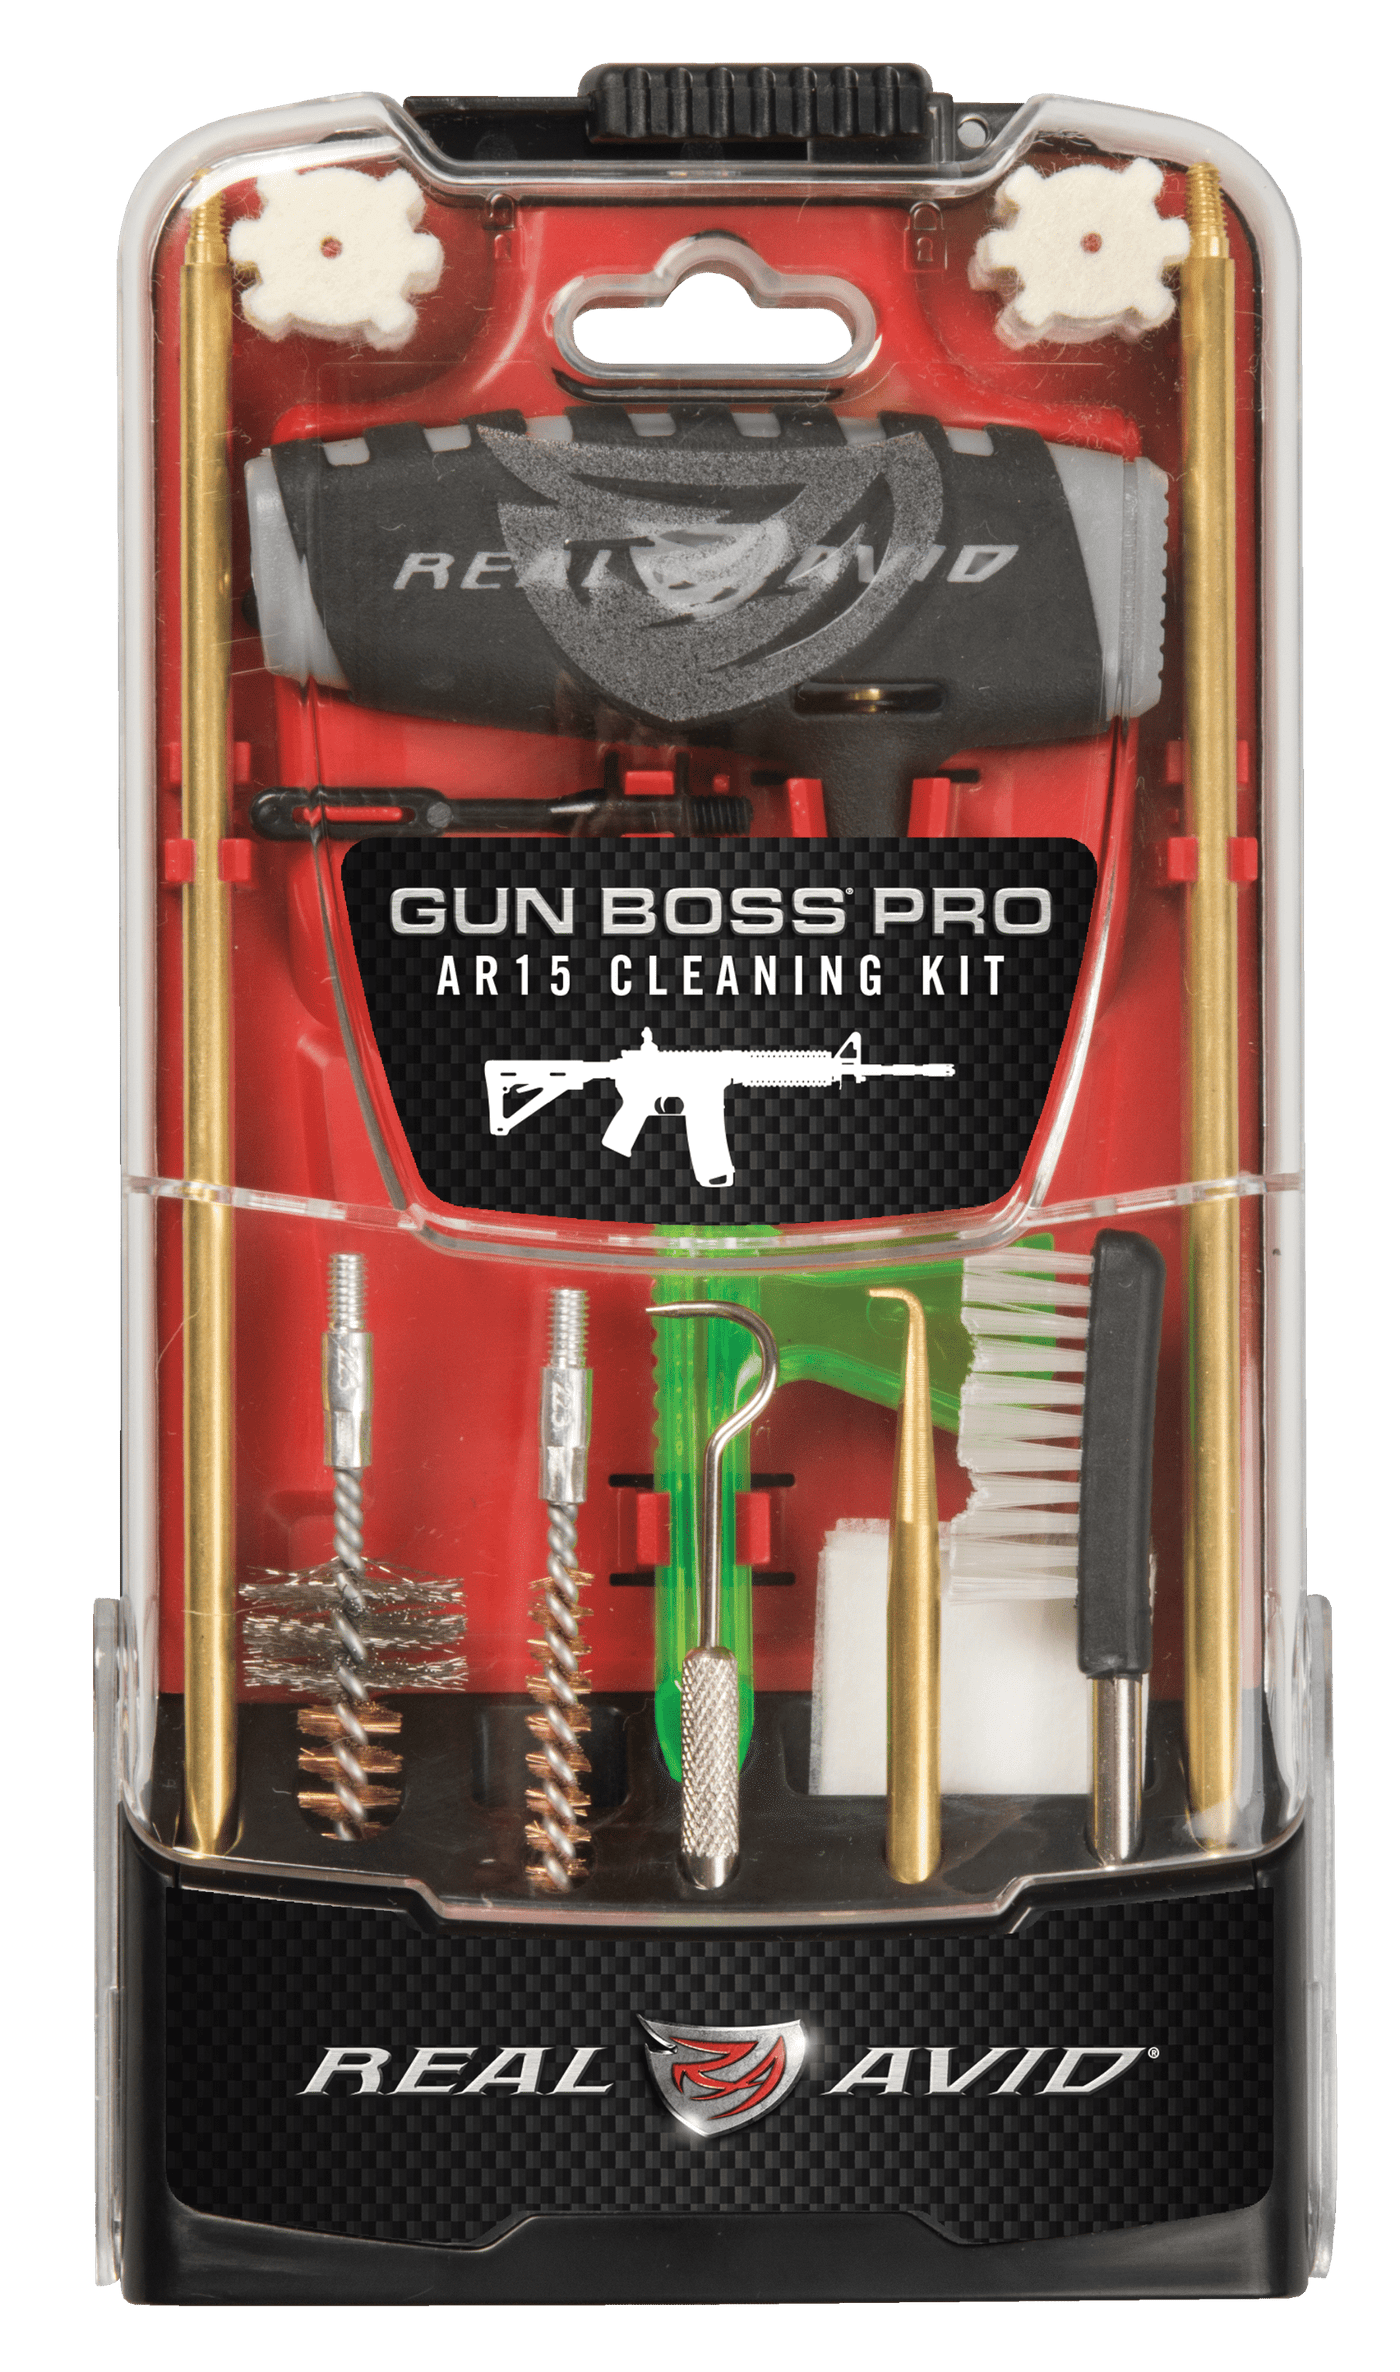 Real Avid Real Avid Gun Boss Pro Ar15 - Cleaning Kit 20-piece Cleaning Kits